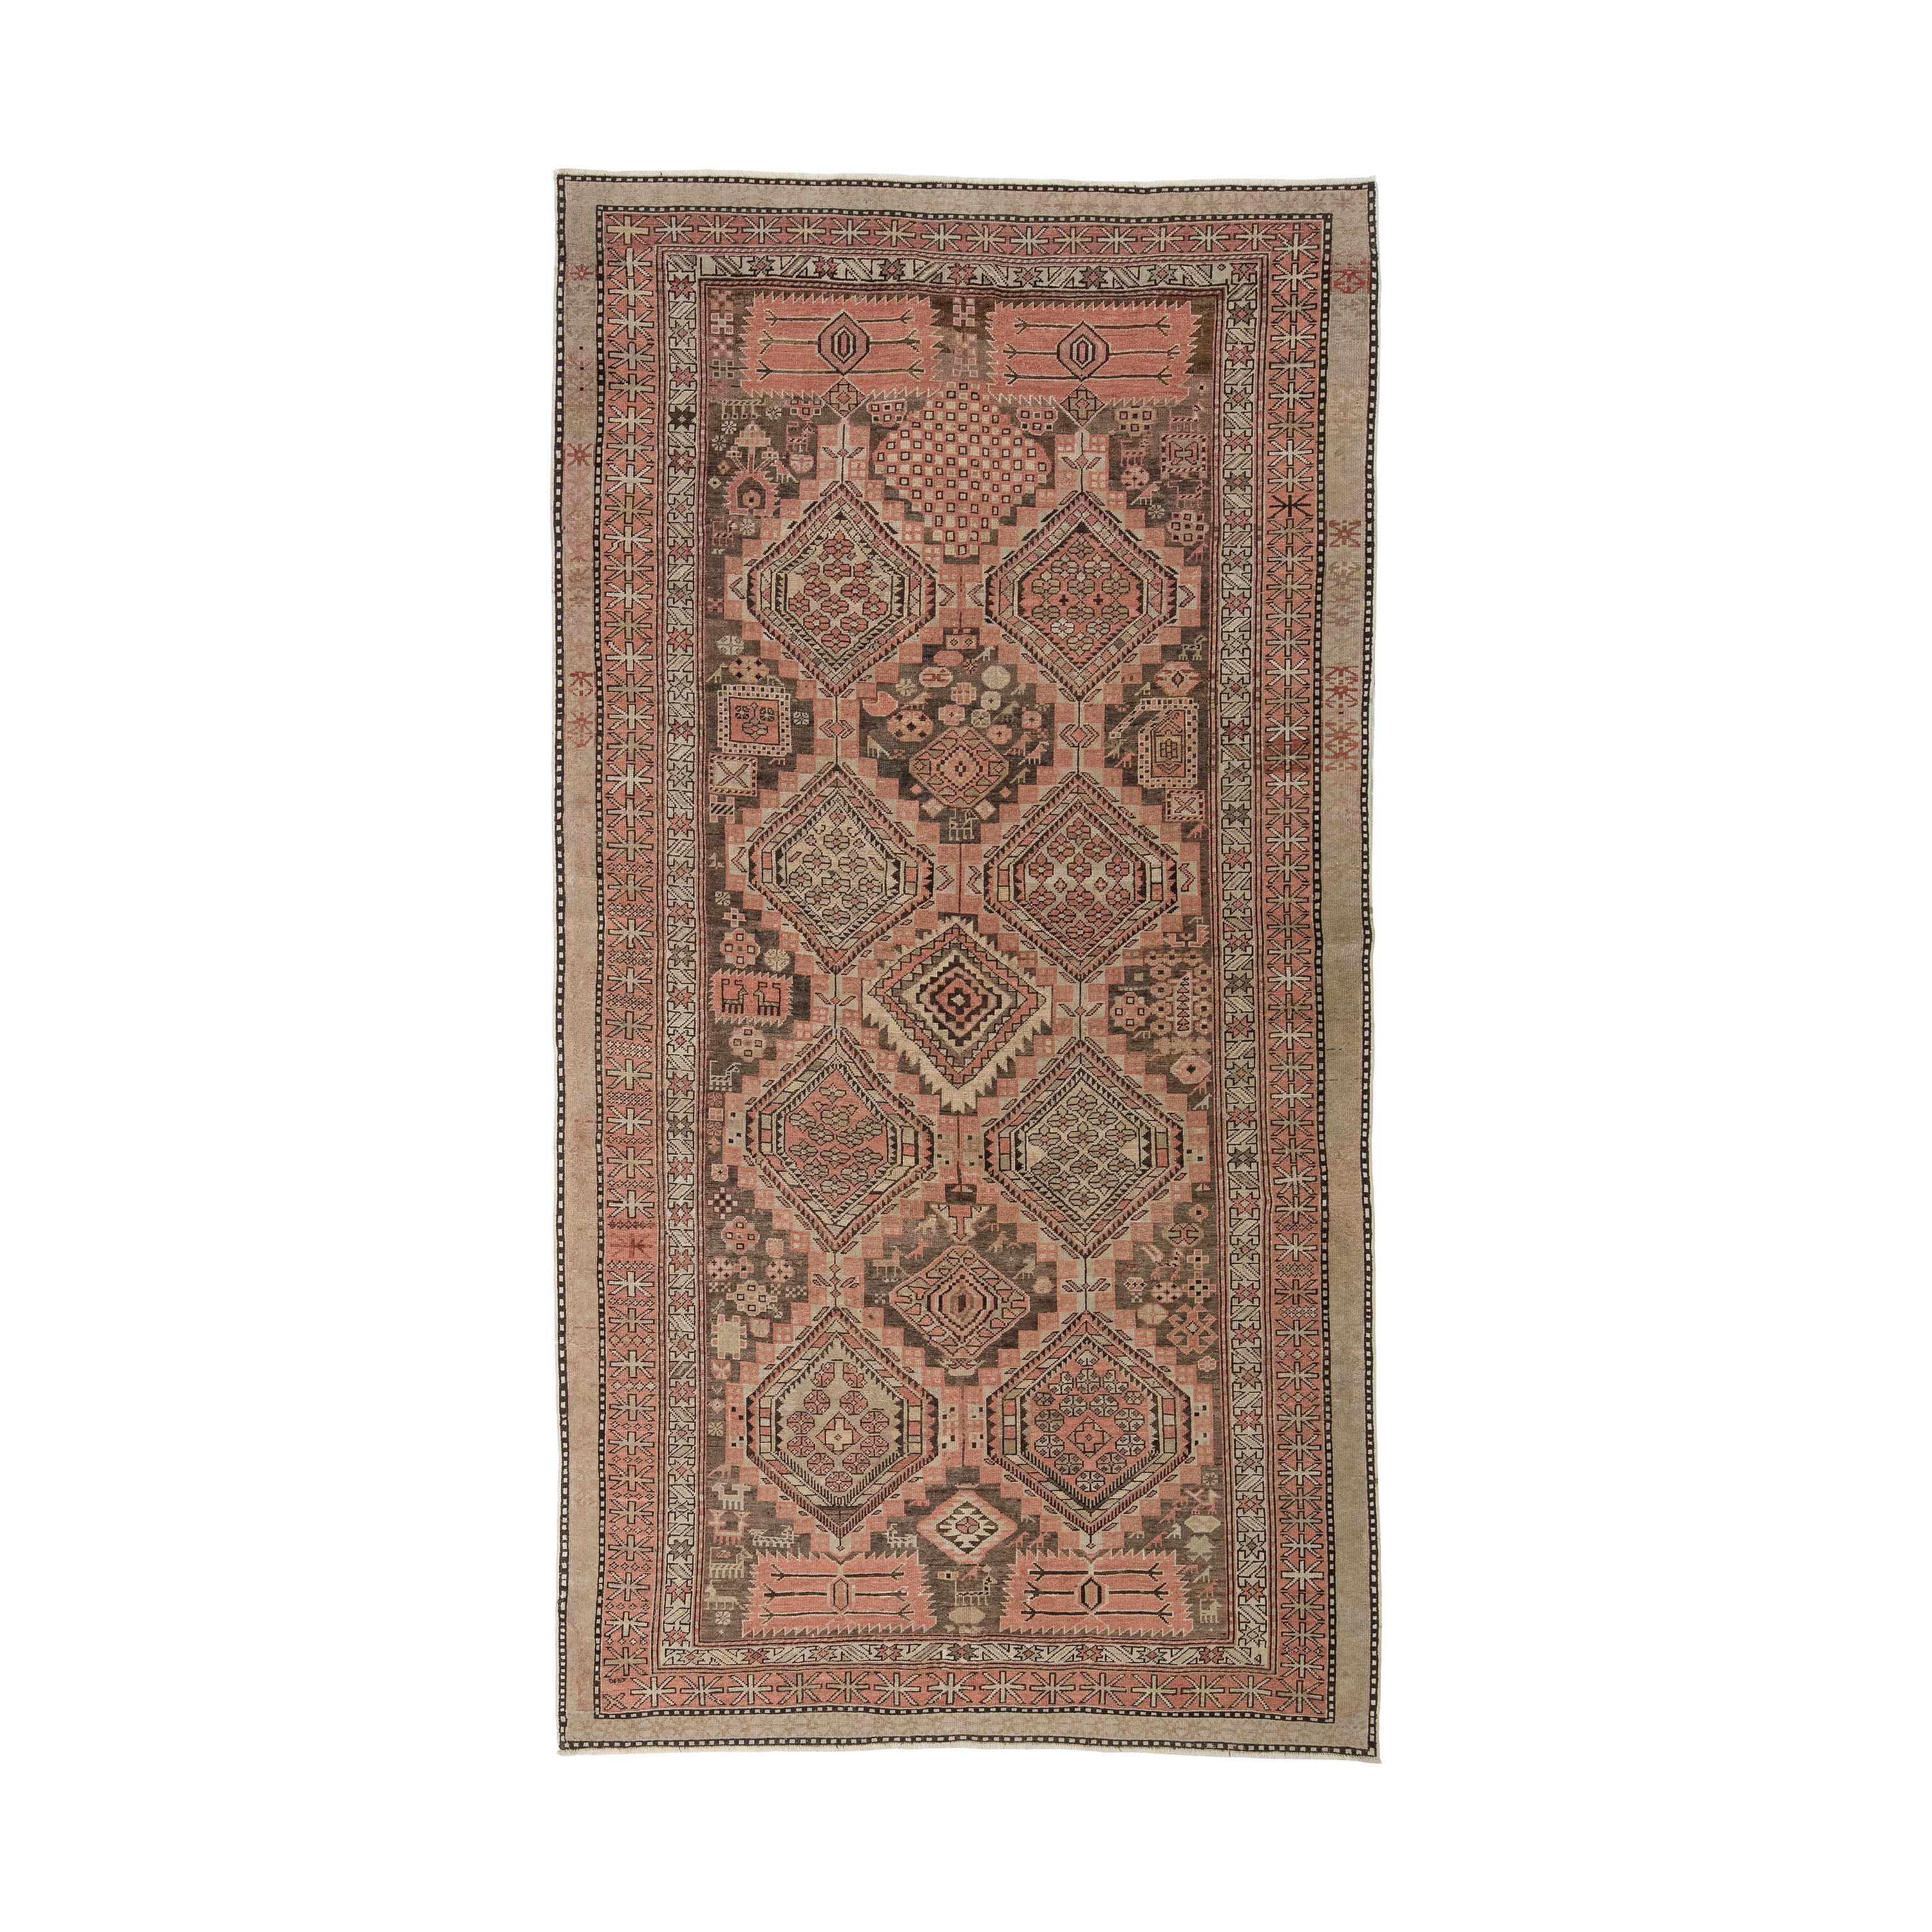 Shirvan is an antique Caucasian tribal rug from Azerbaijan, featuring a repeated articulated geometric pattern. 